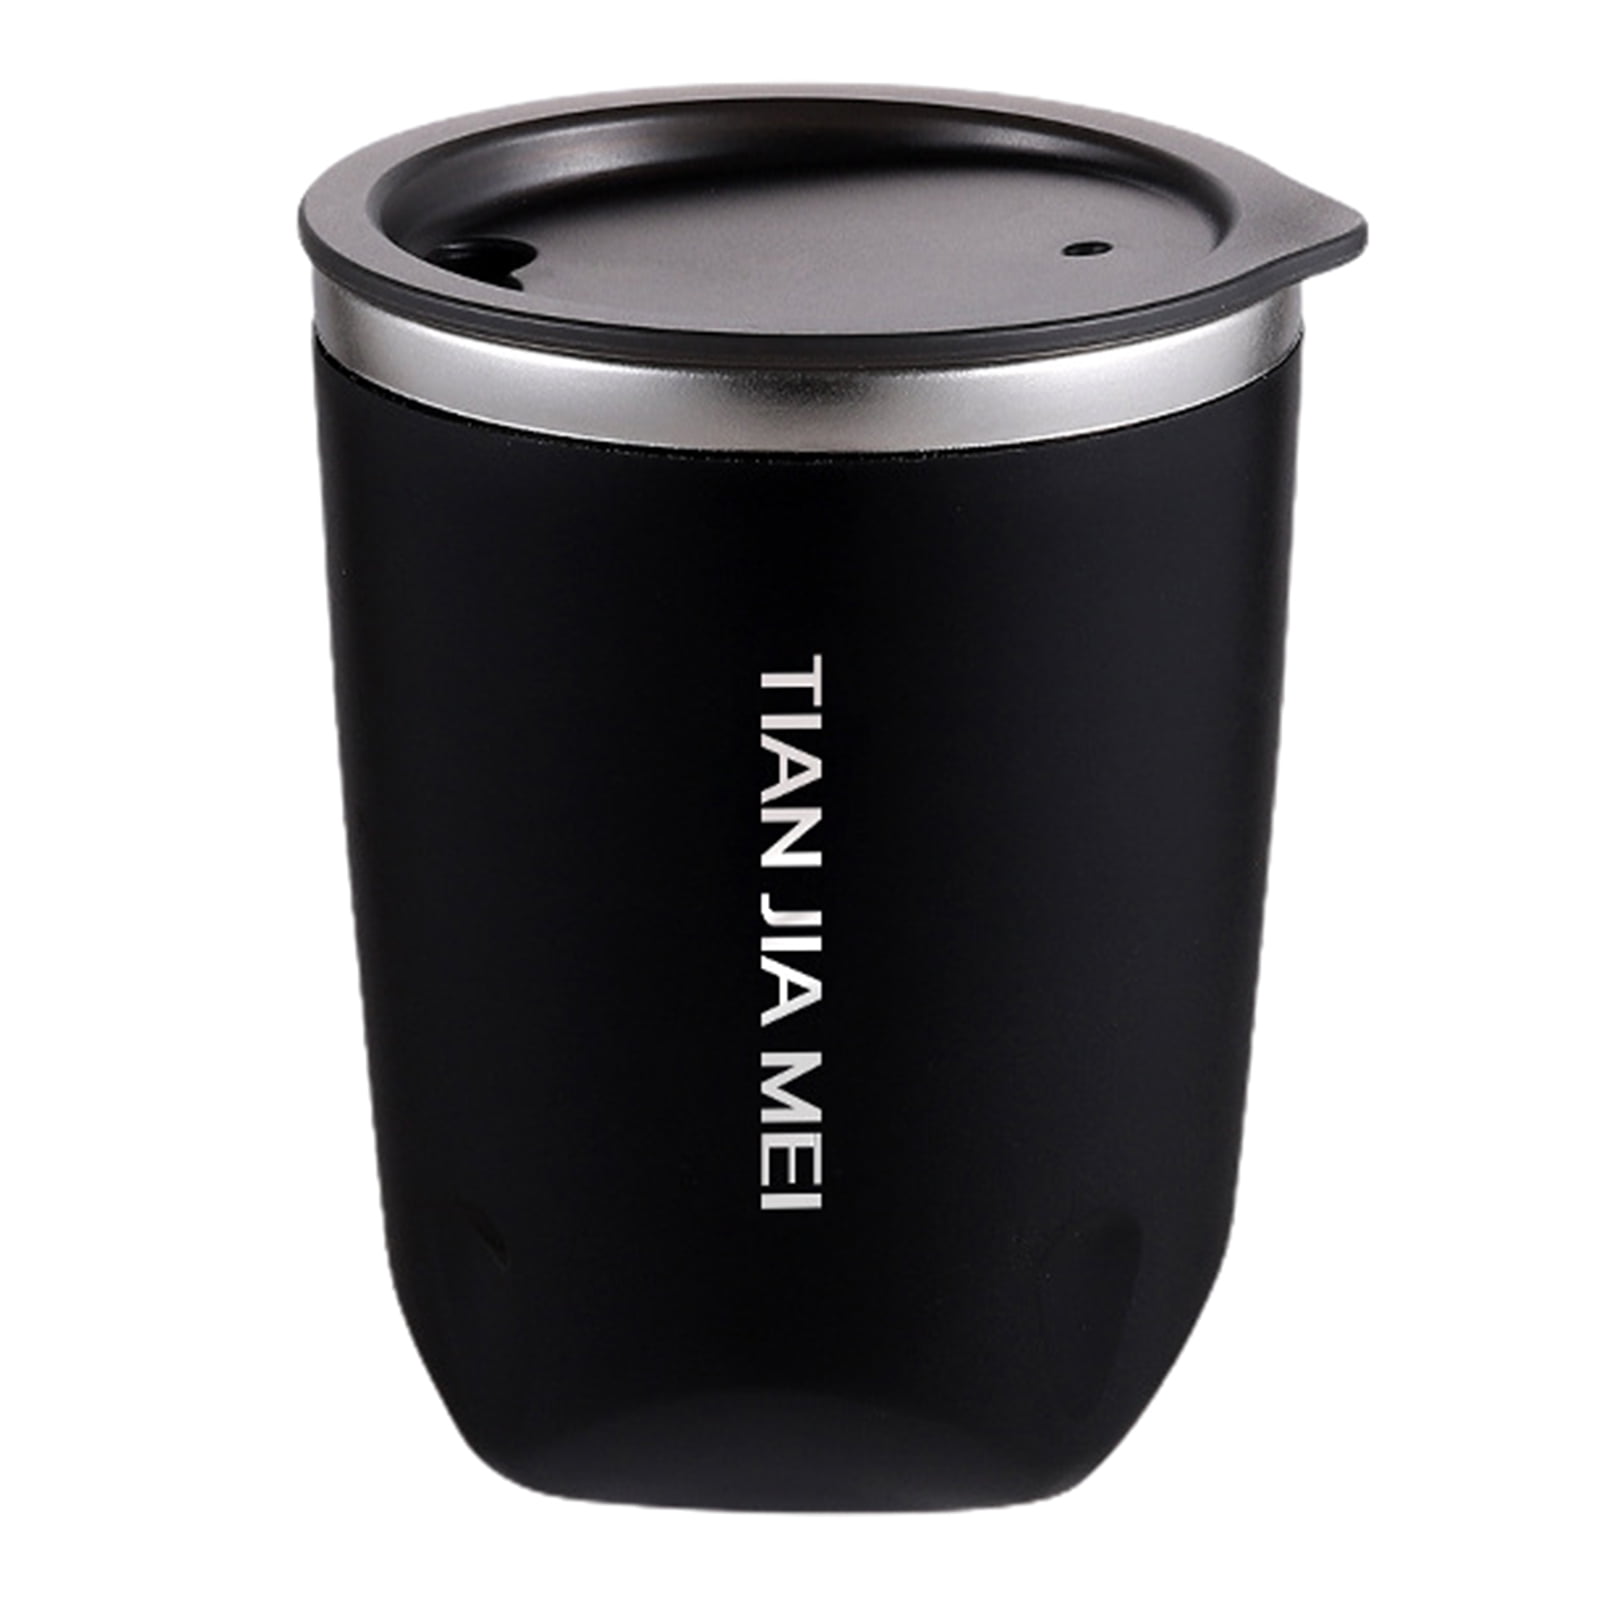 Travelwant 500ml Insulated Coffee Mug with Lid, Stainless Steel, Double Wall Vacuum Insulated Travel Mug Coffee Cup with Handle, Stainless Steel/